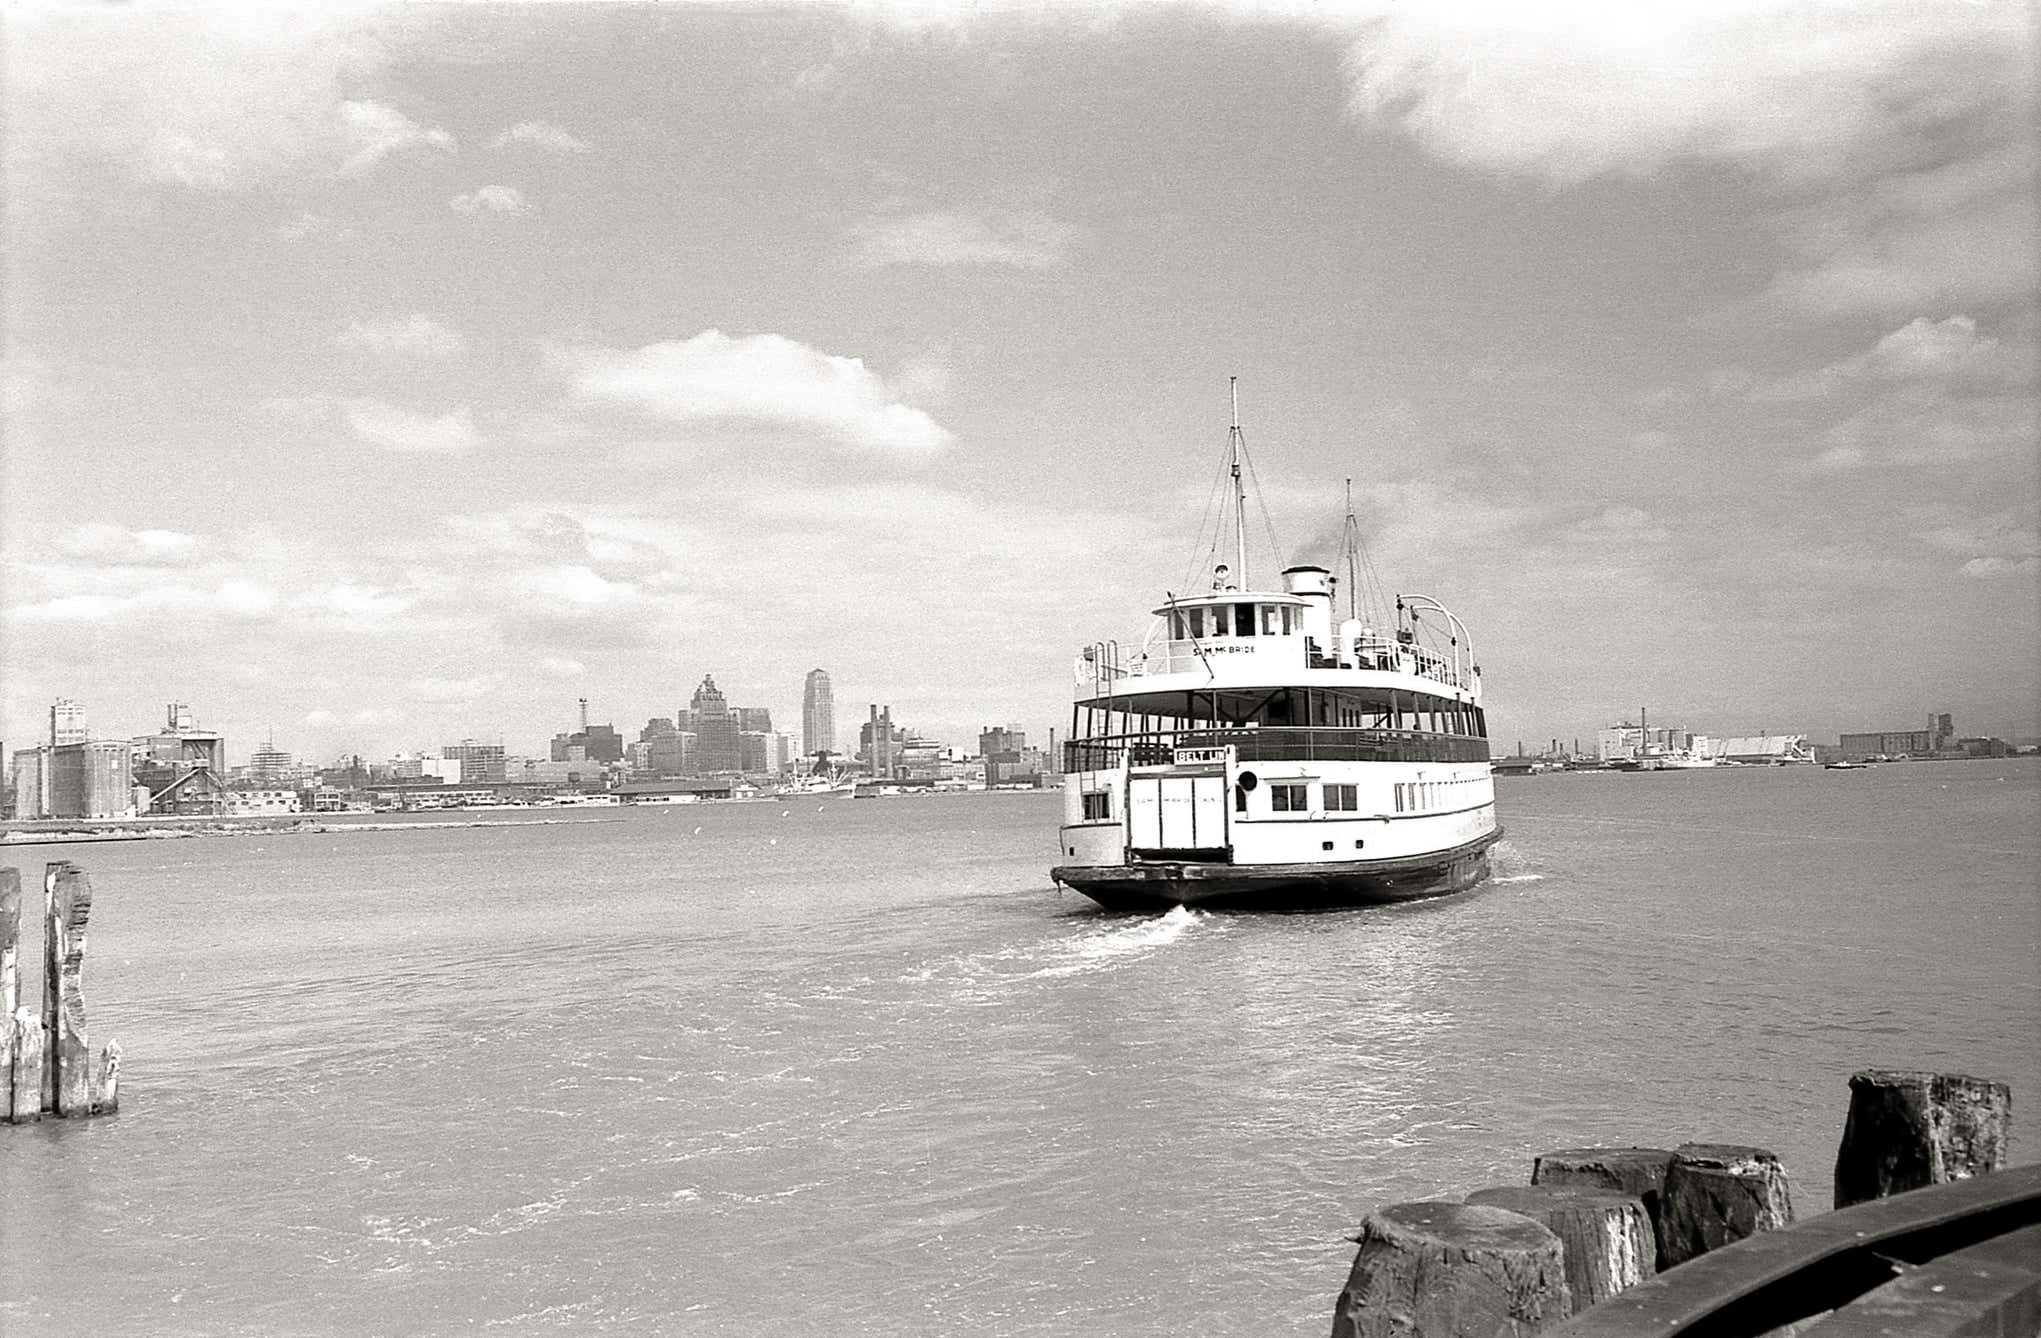 The ferry Sam McBride, running a ‘belt line’ route, departing the Hanlan’s Point ferry dock, 1960.